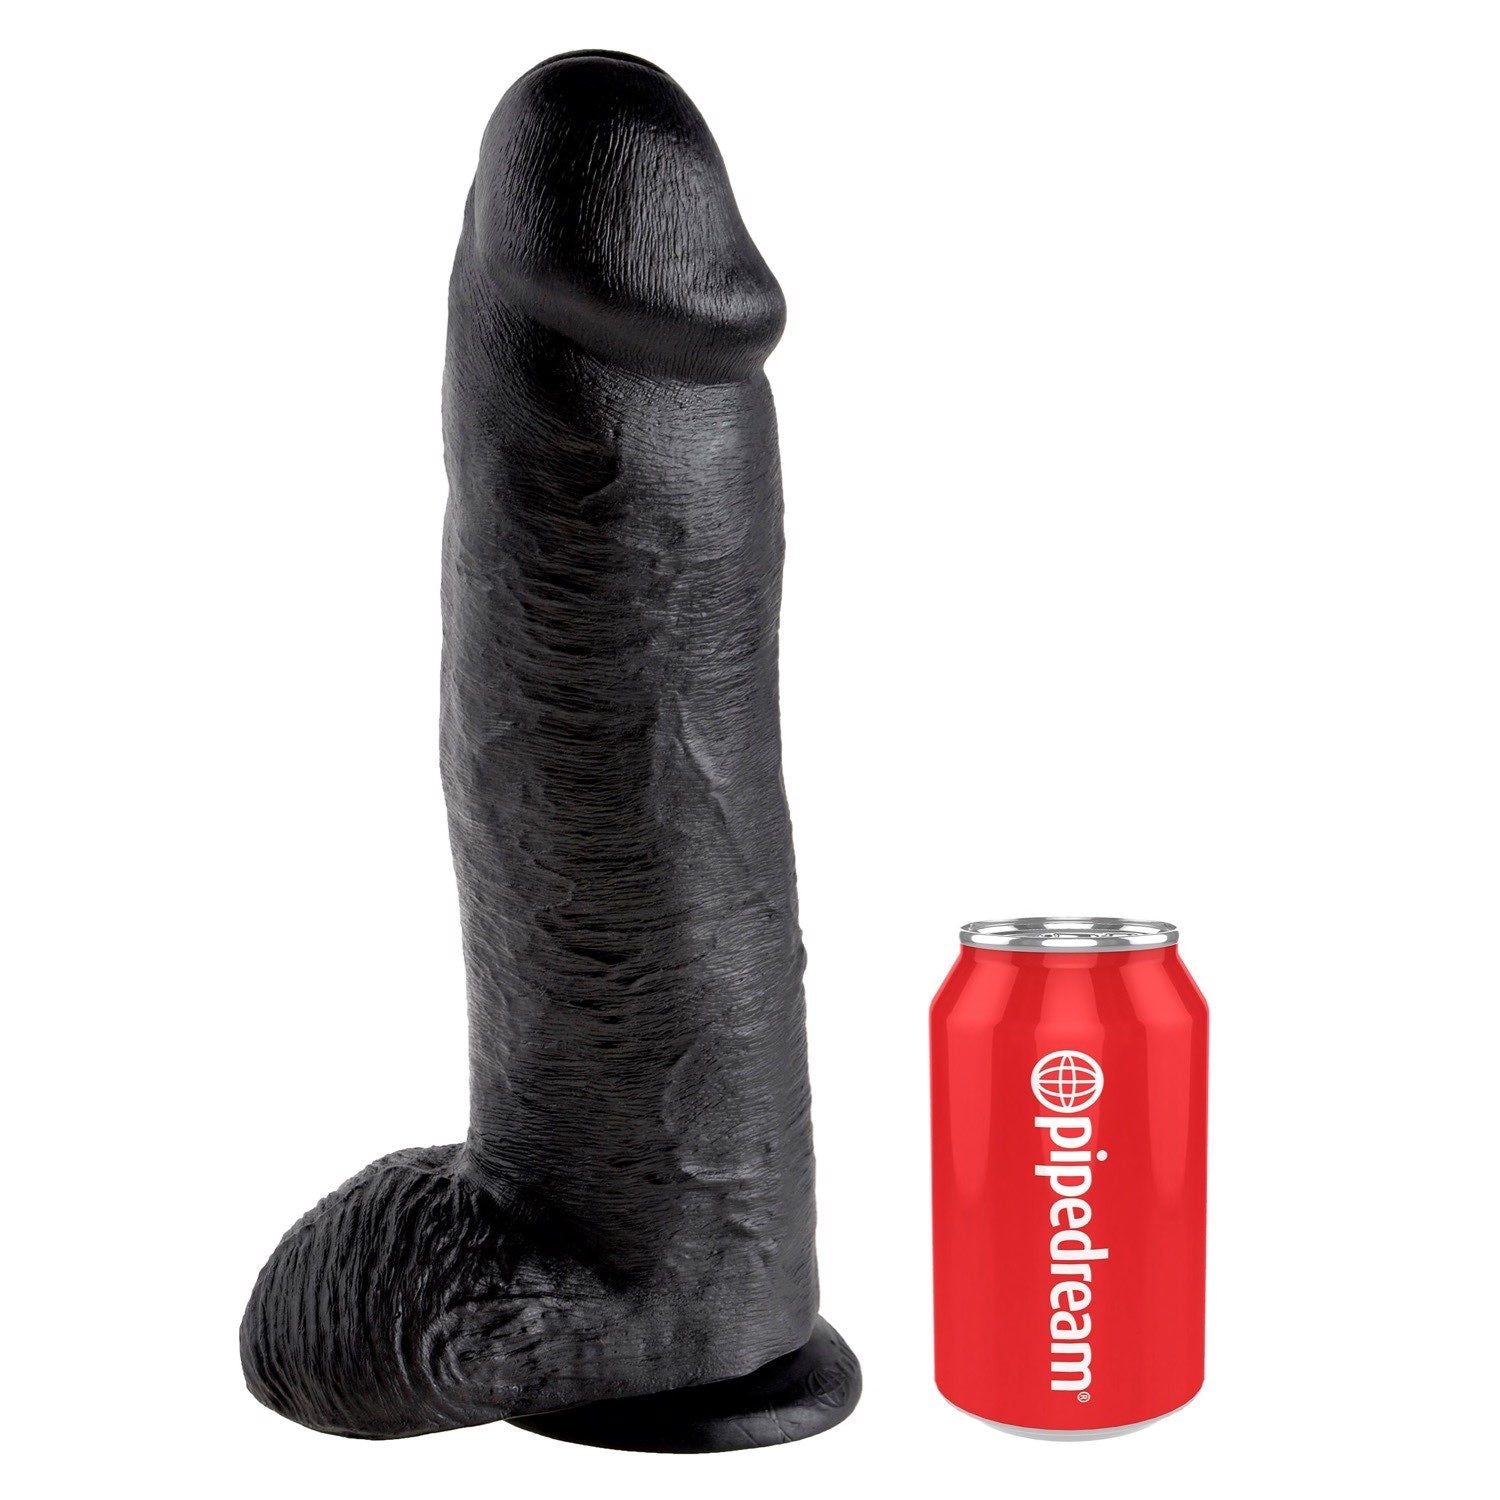 King Cock 12&quot; Cock With Balls - Black 30.5 cm (12&quot;) Dong by Pipedream